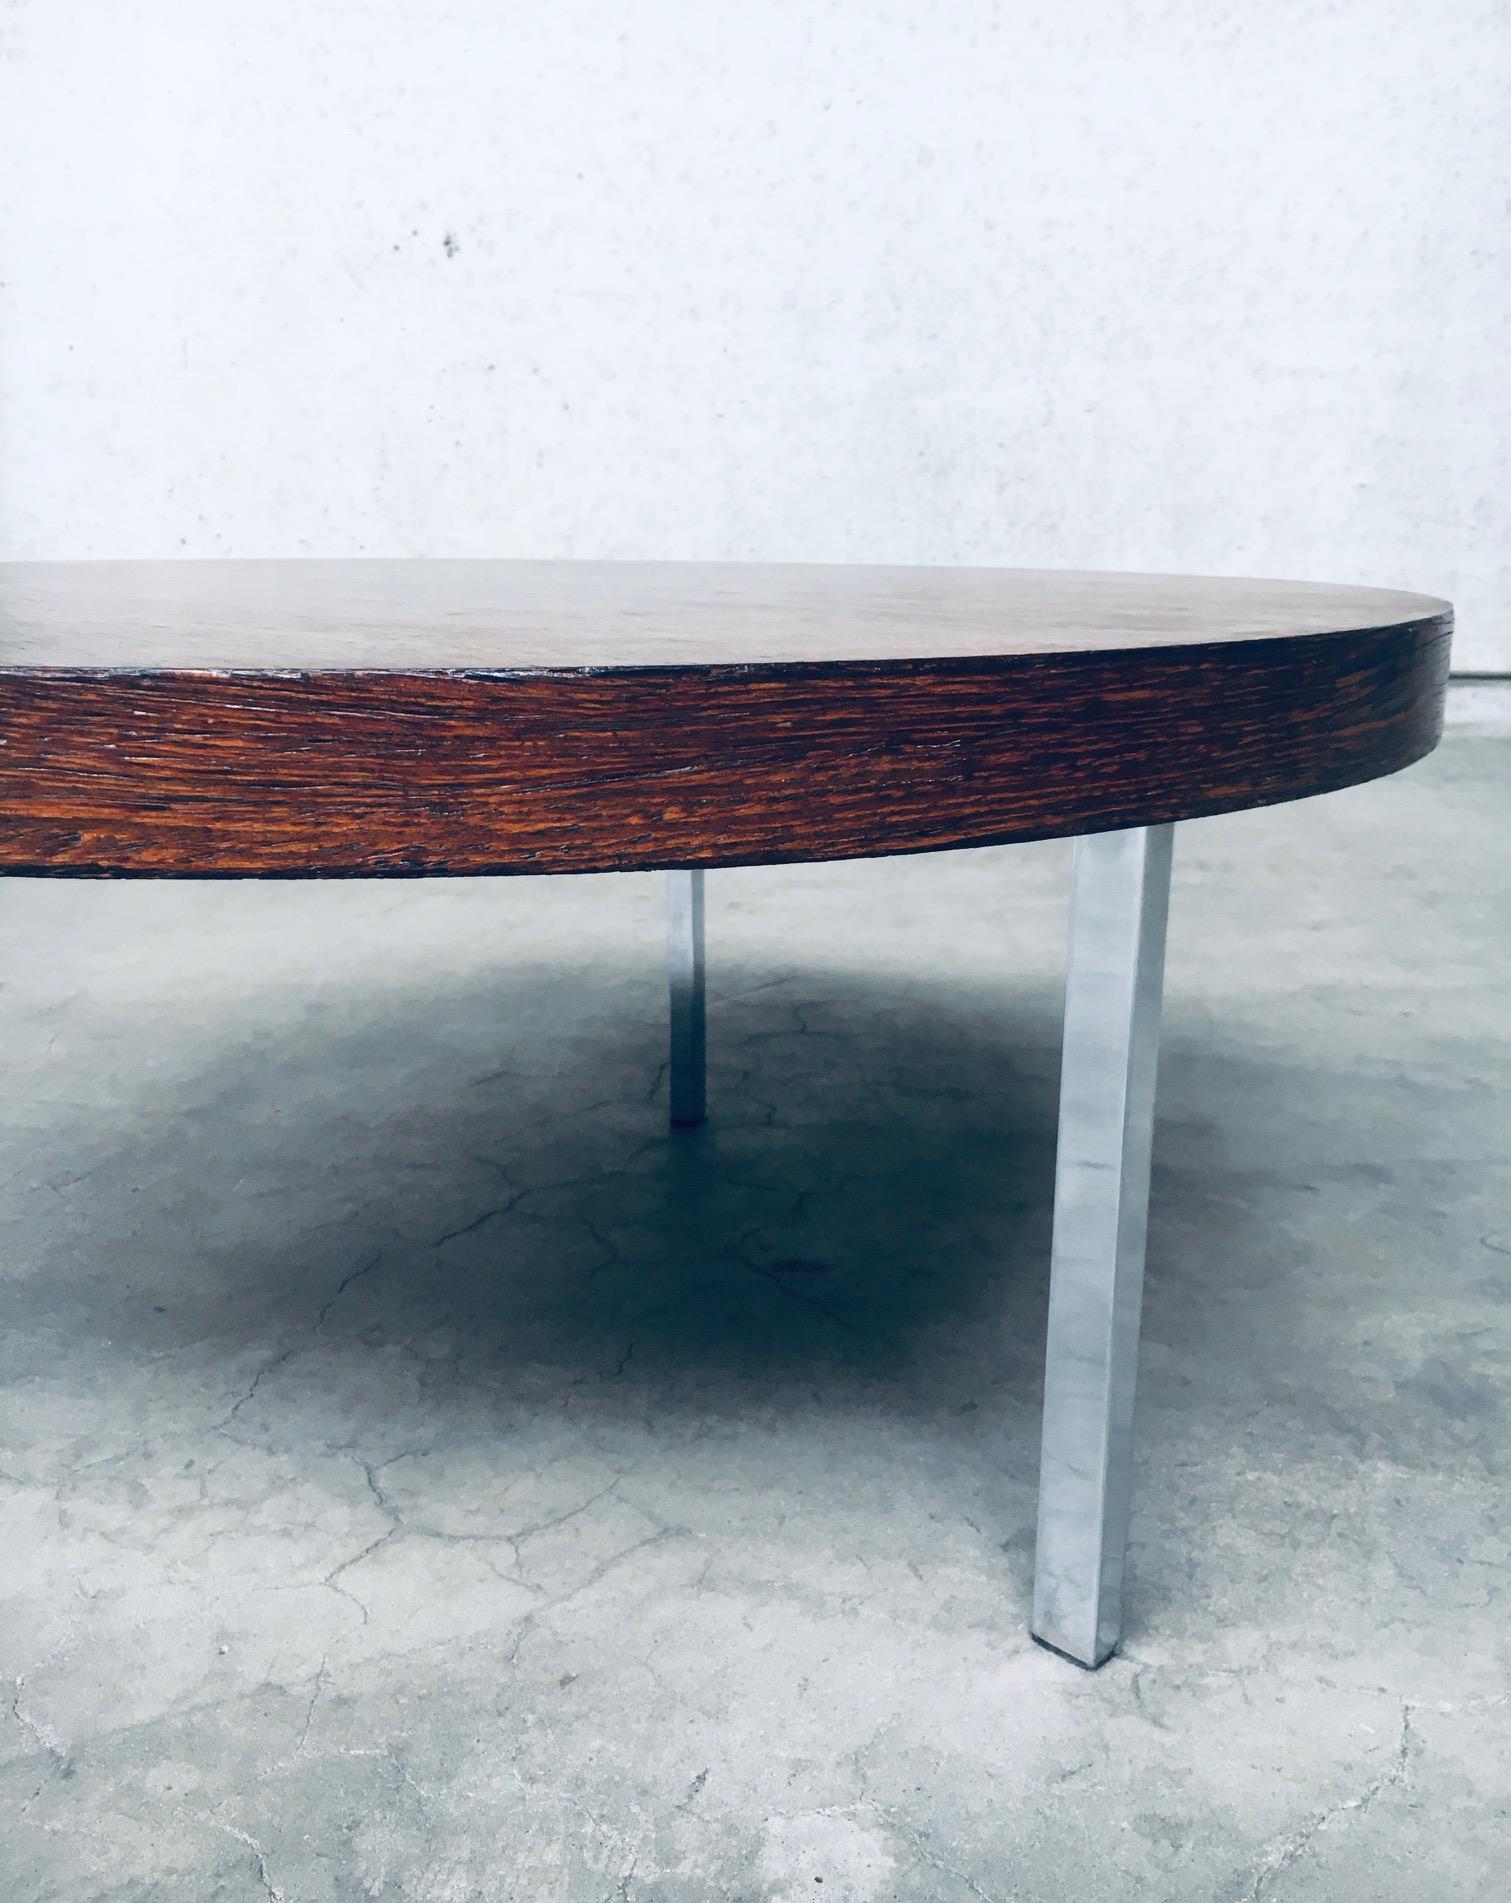 Midcentury Modern Dutch Design Tripod Coffee Table, Netherlands 1960's For Sale 8